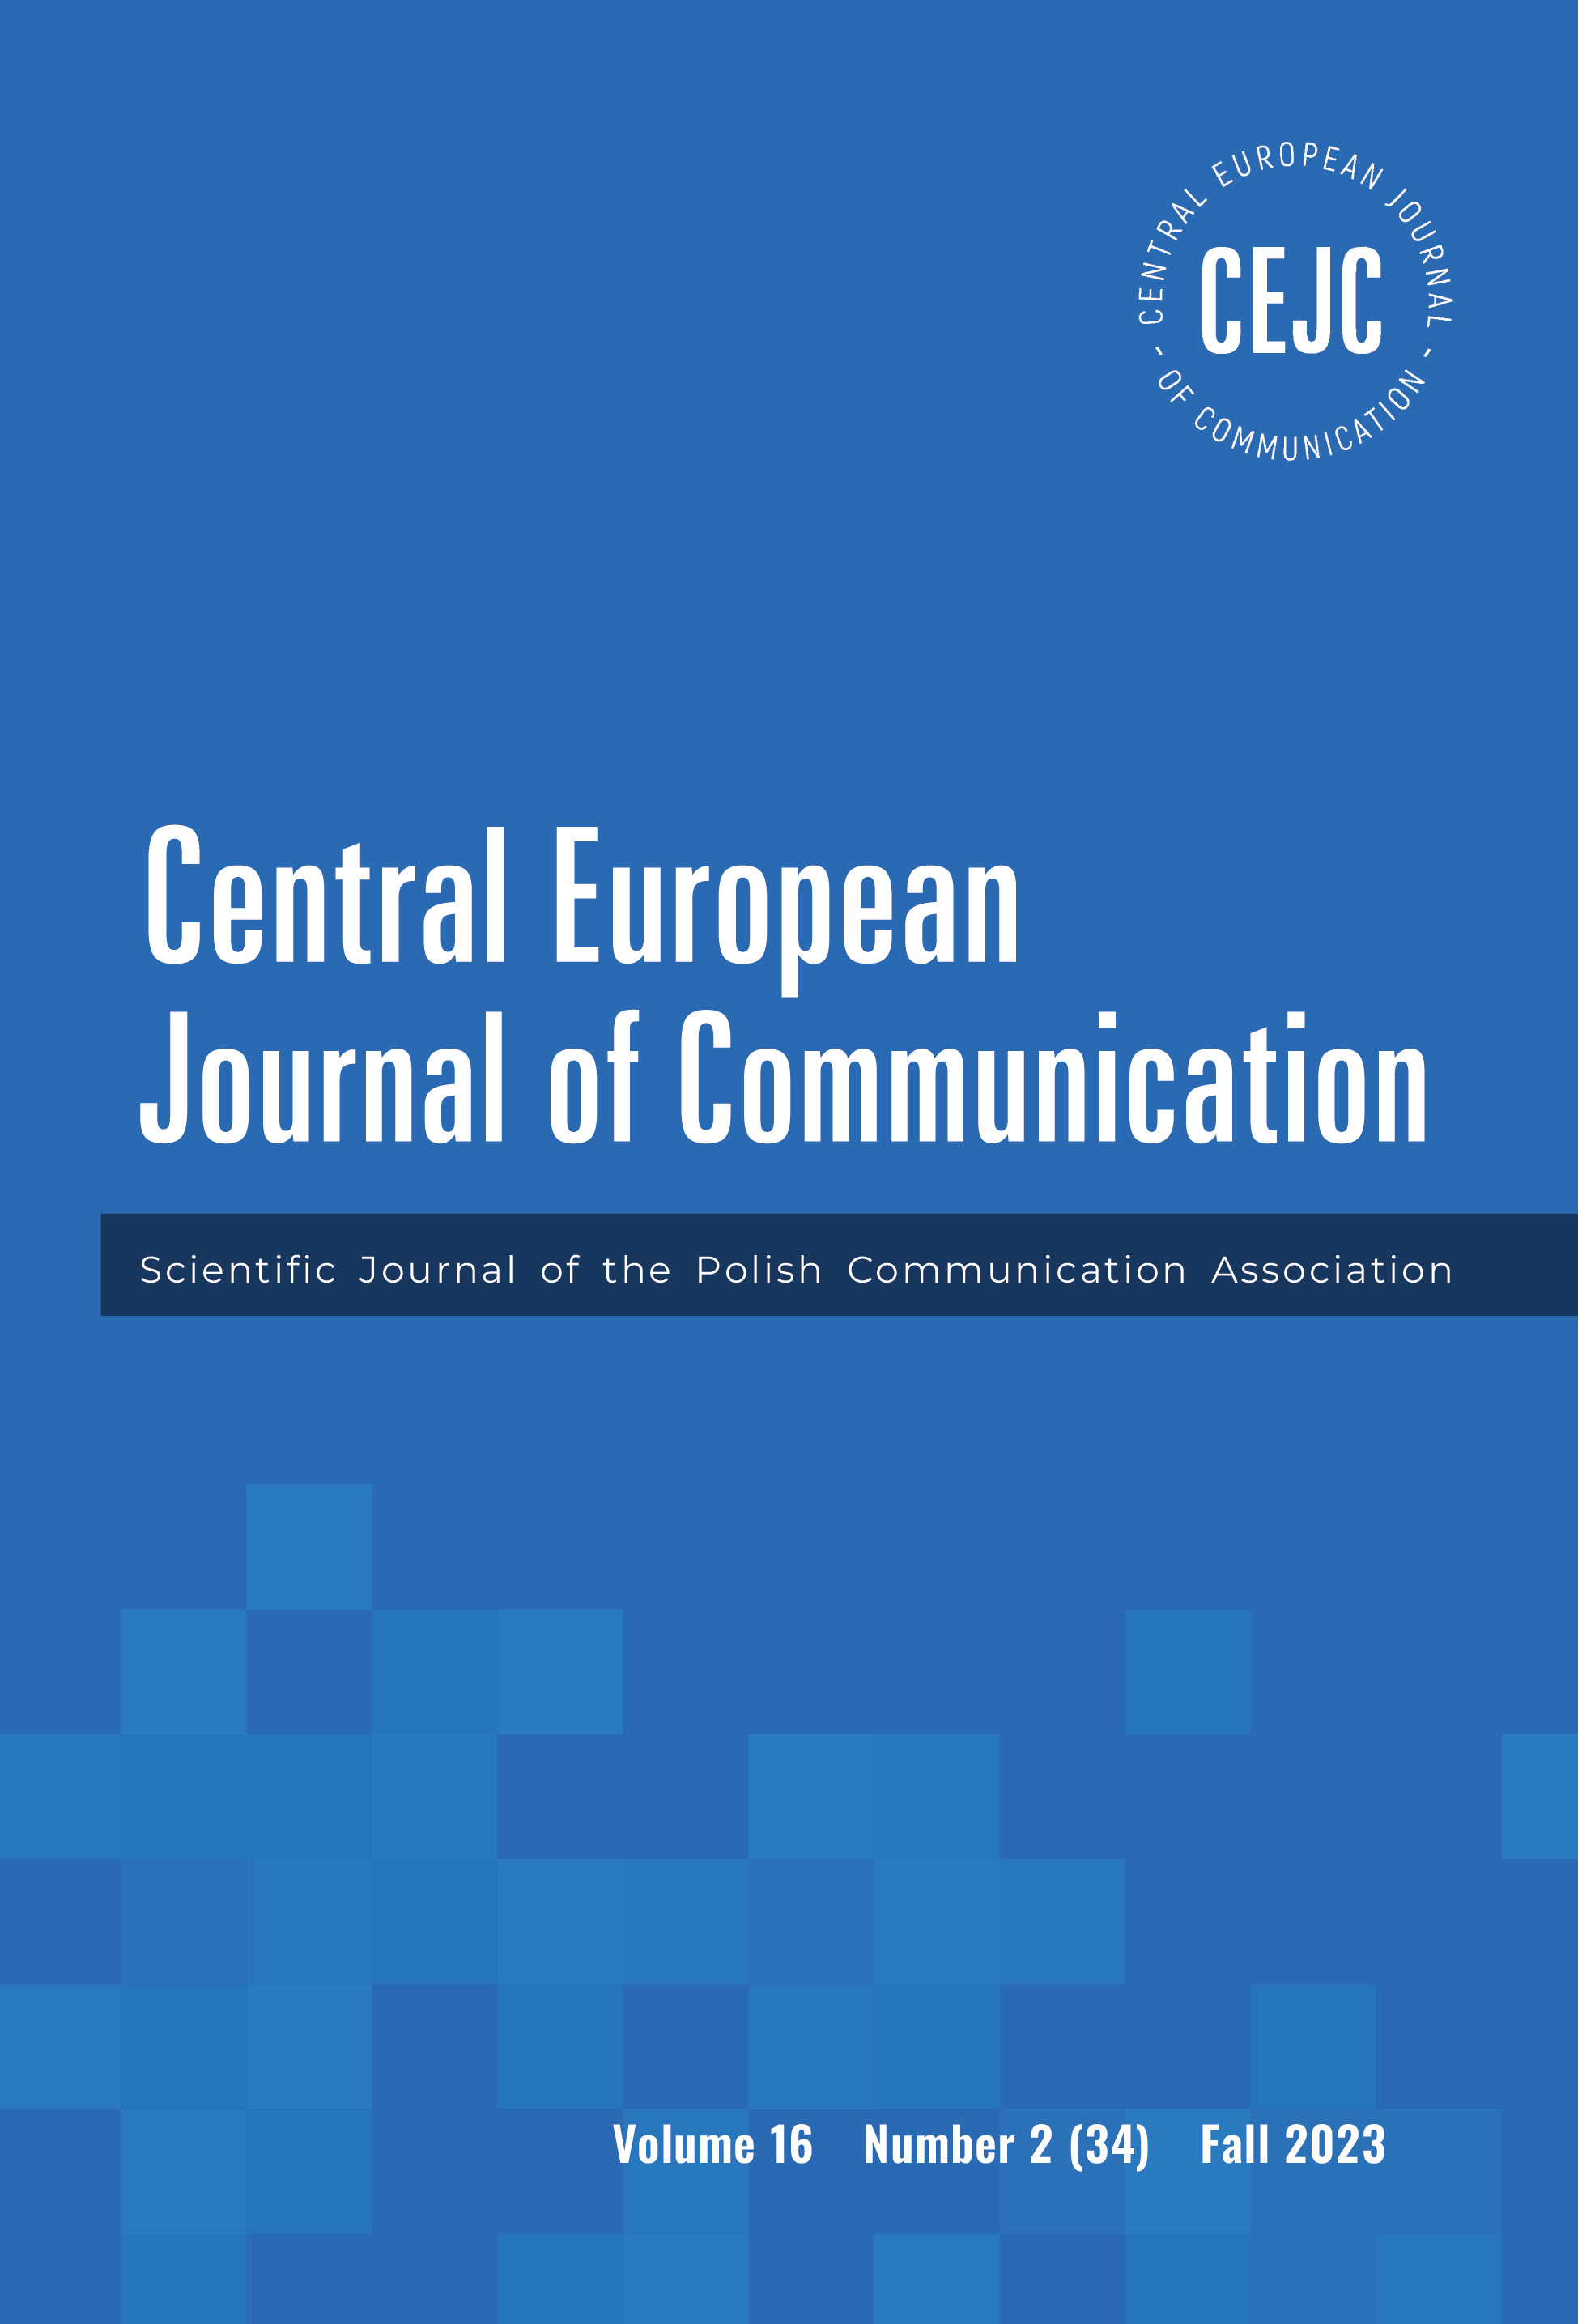 The Threats, Challenges and Opportunities in the Changing Central and Eastern European Media Environments Cover Image